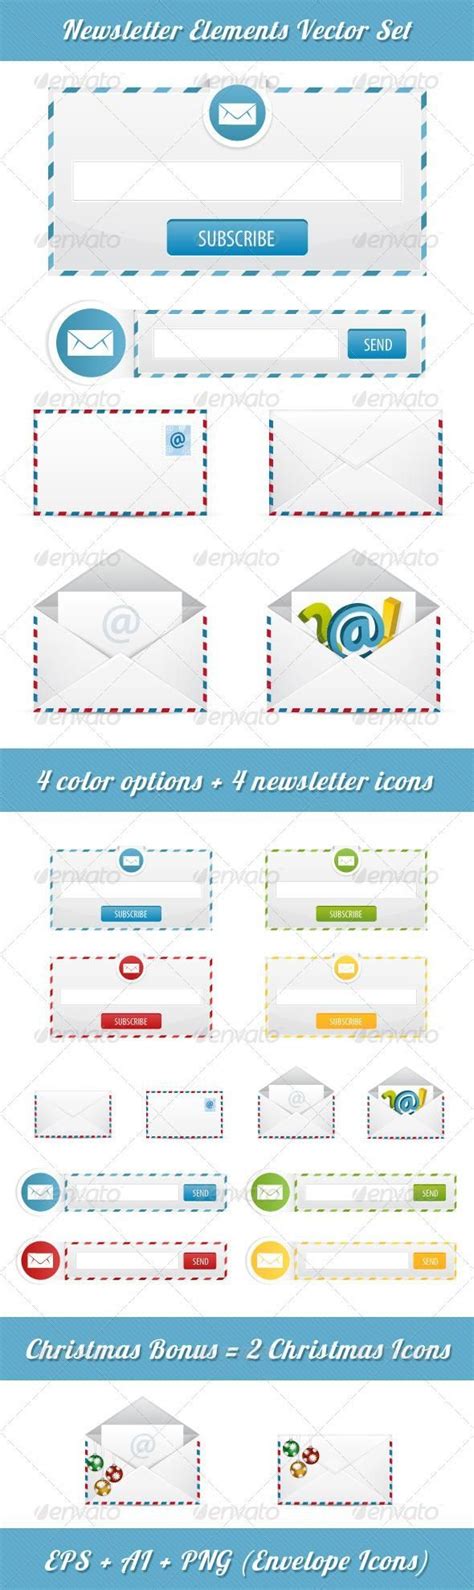 Newsletter Subscription | Subscription form, Newsletter subscription, Psd template website